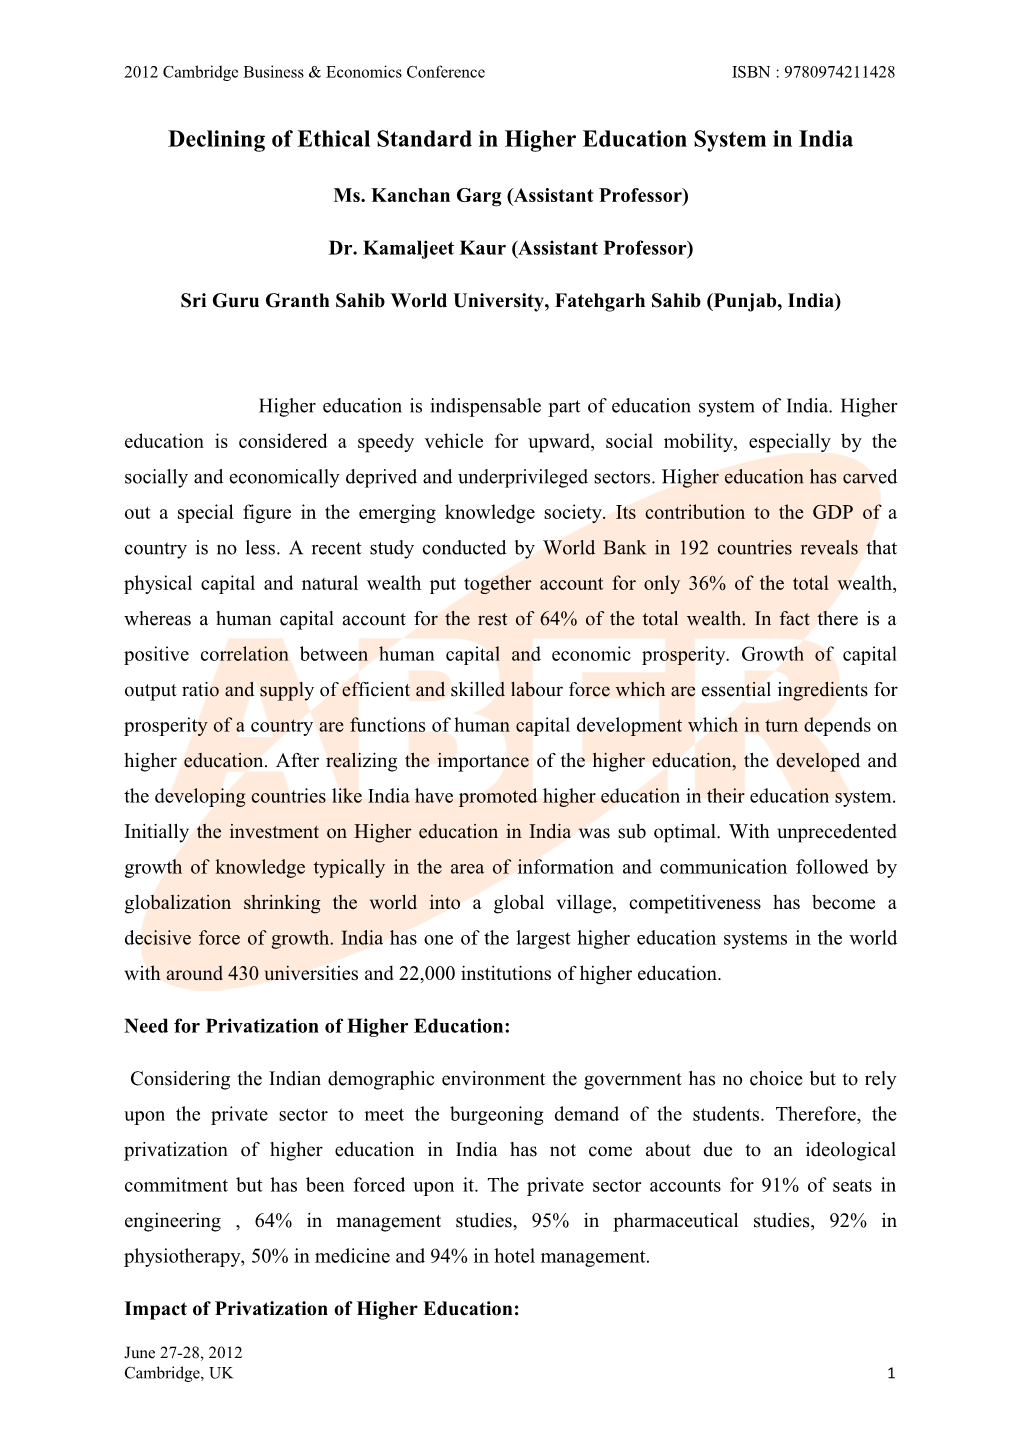 Declining of Ethical Standard in Higher Education System in India